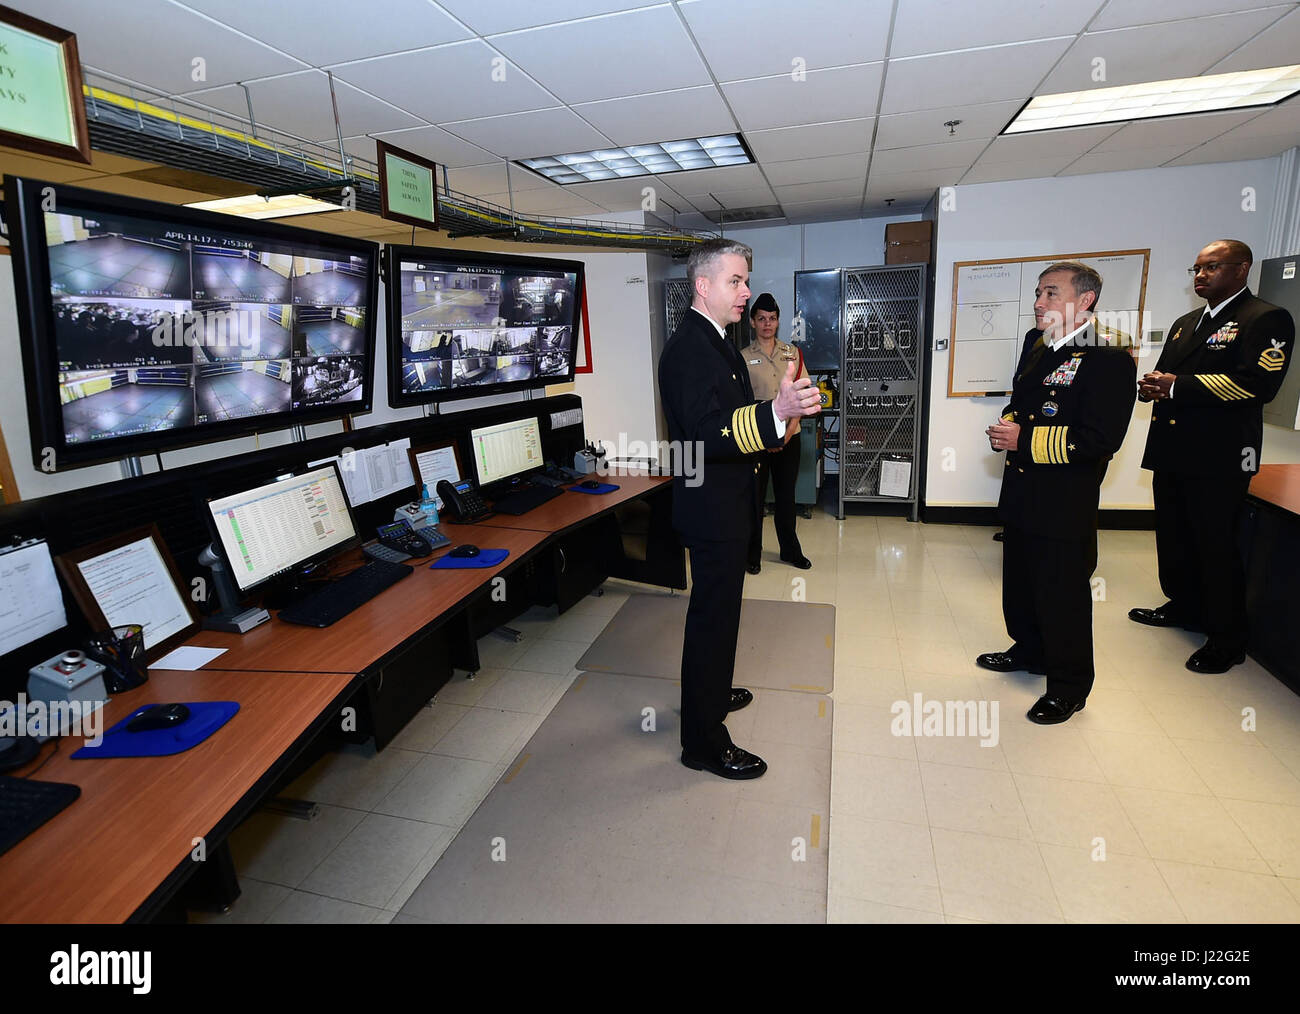 170414-N-IK959-308  GREAT LAKES, Ill. (April 14, 2017) Capt. Michael S. Garrick, commanding officer at Recruit Training Command, conducts a tour of the master control room of the U. S. Navy’s largest simulator, USS Trayer (BST 21), to Adm. Harry B. Harris, commander, U. S. Pacific Command, center. Trayer is a 210-foot-long Arleigh Burke-class destroyer simulator for recruits to train on Battle Stations, a 12-hour culmination of basic training and the last evolution recruits complete before they graduate. Harris also was the reviewing officer at the weekly pass-in-review recruit graduation. (U. Stock Photo